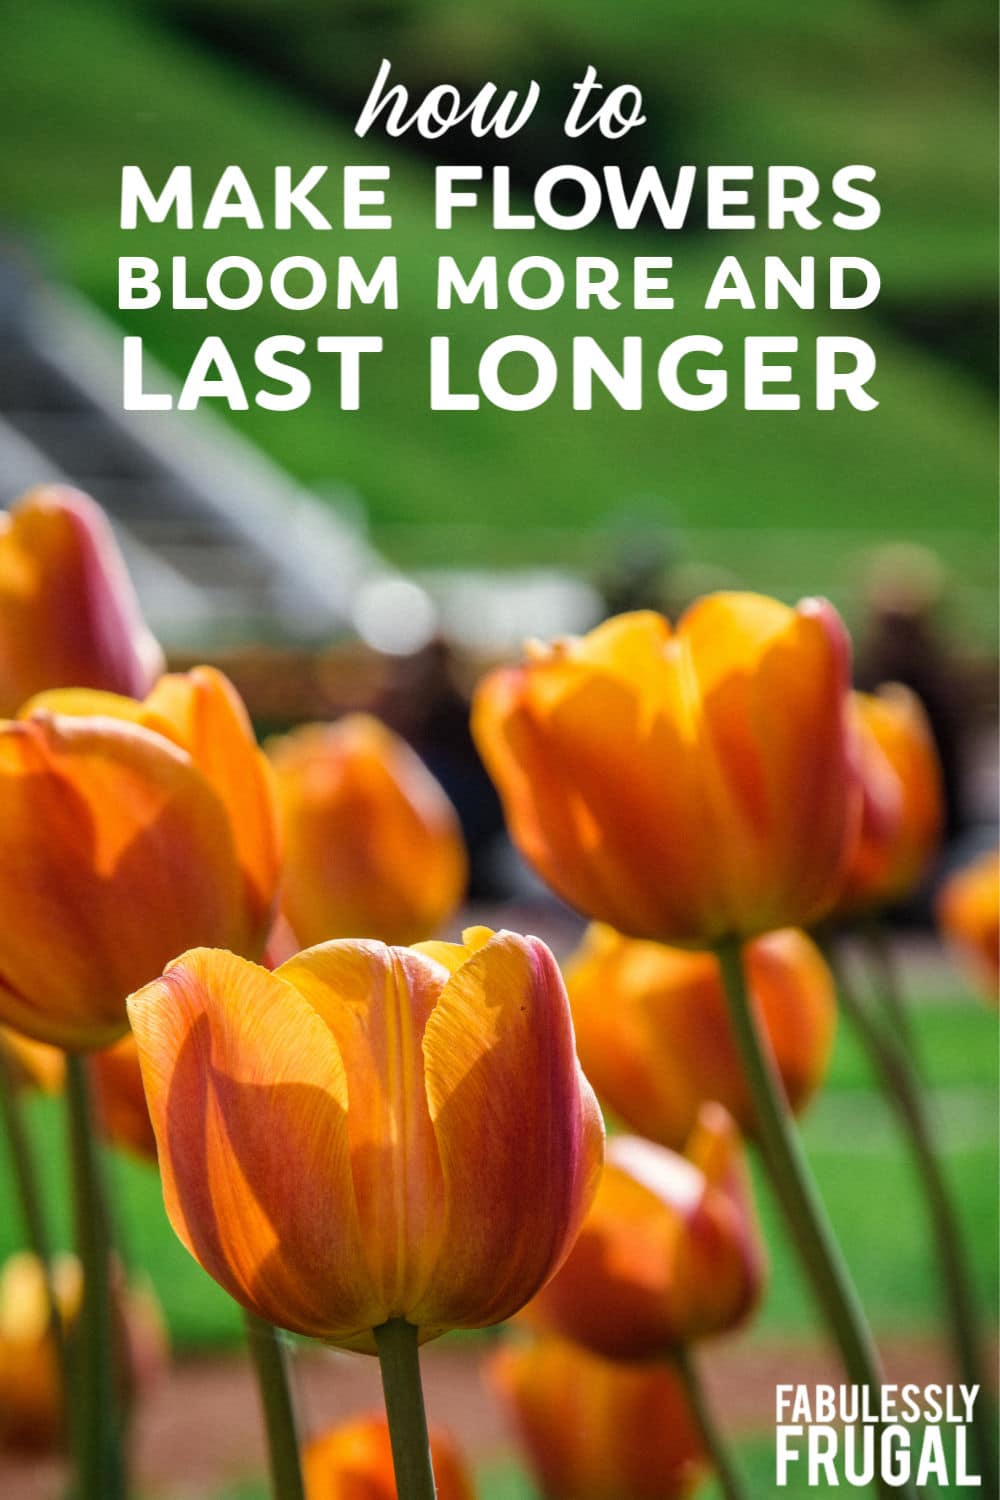 How to make flowers bloom more and last longer